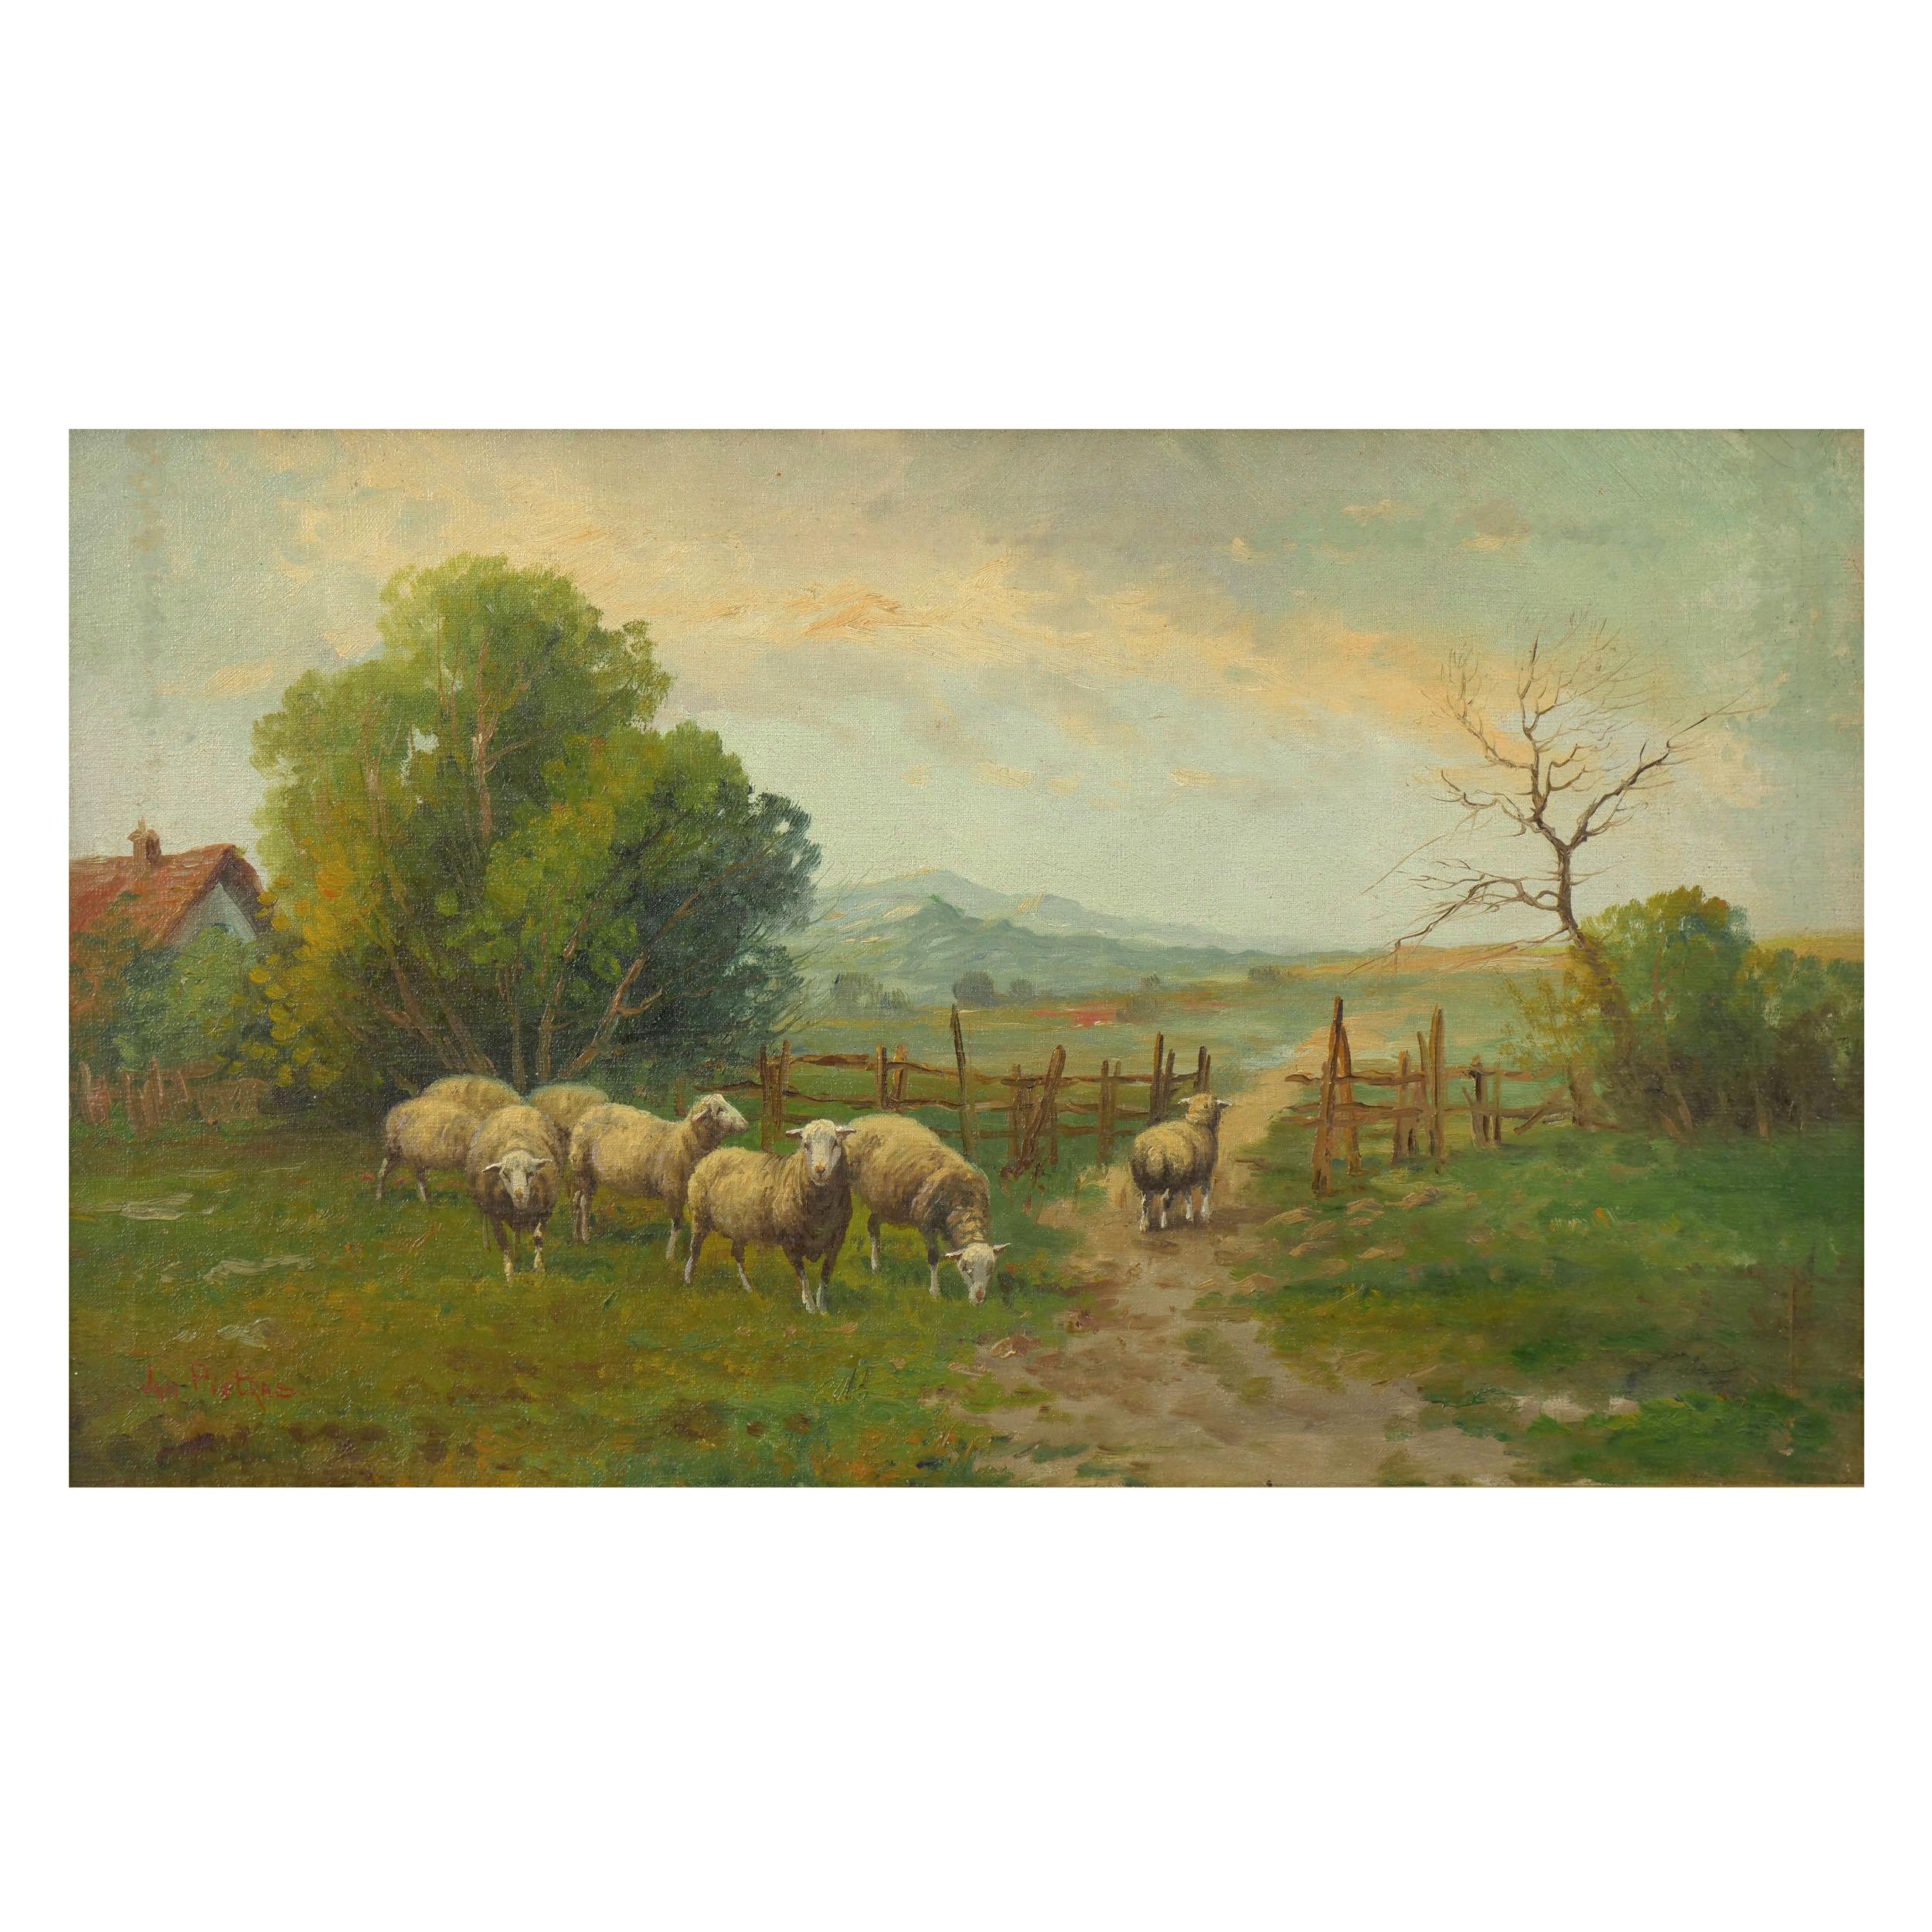 19th Century Antique Pastoral Landscape Painting of Sheep by Jan Pietras